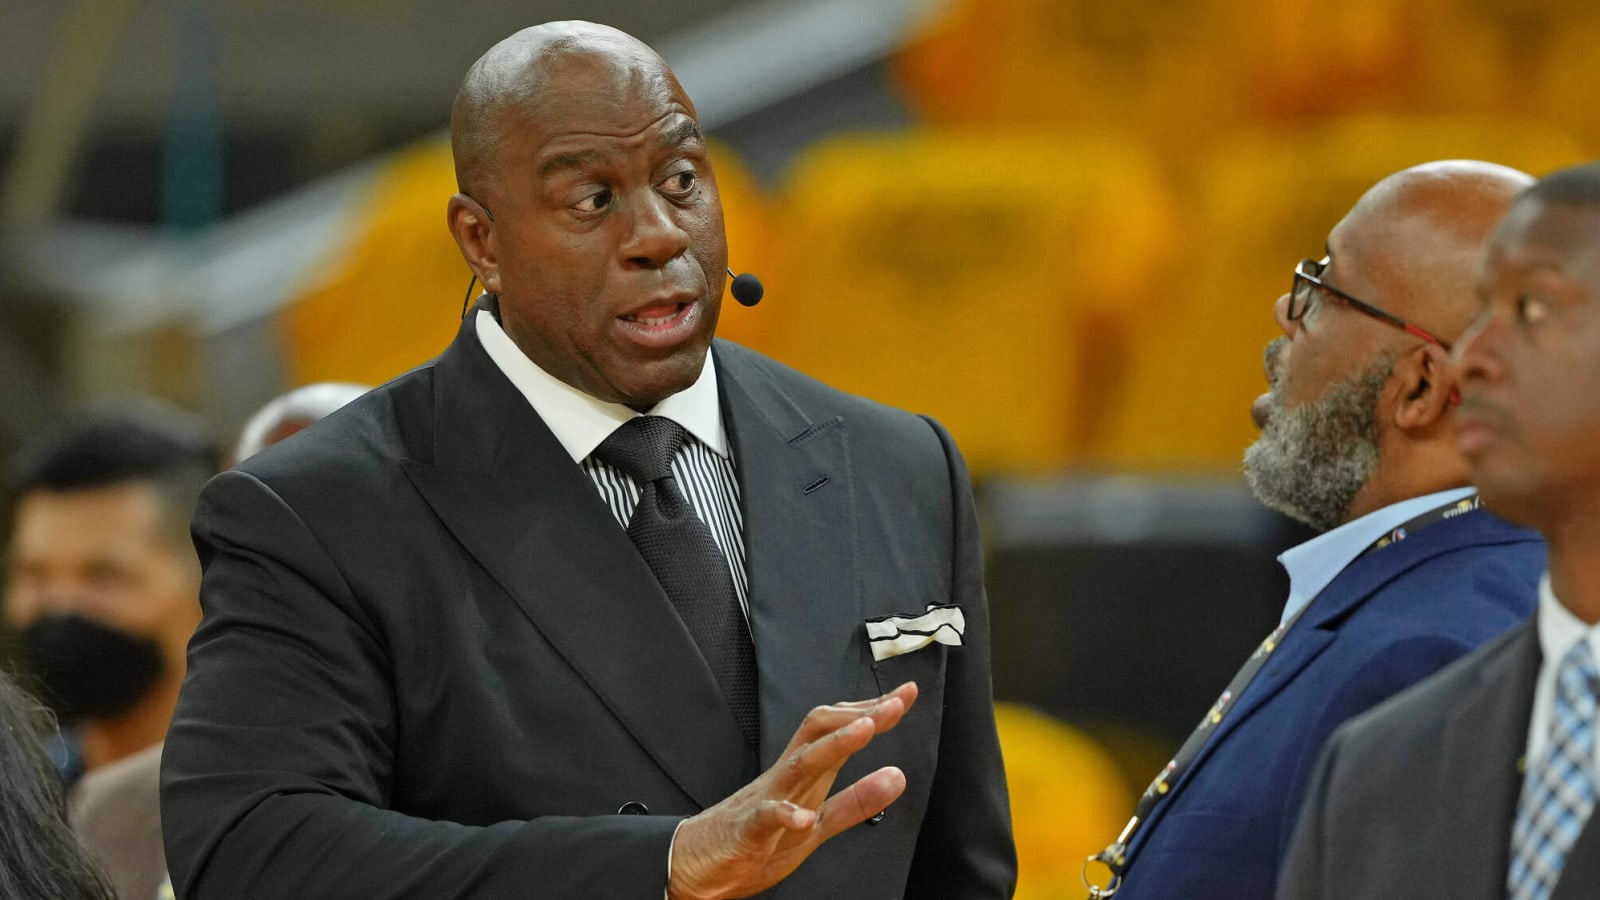 Magic Johnson issues apology to Lakers fans over claiming team has 'nobody but themselves to blame'